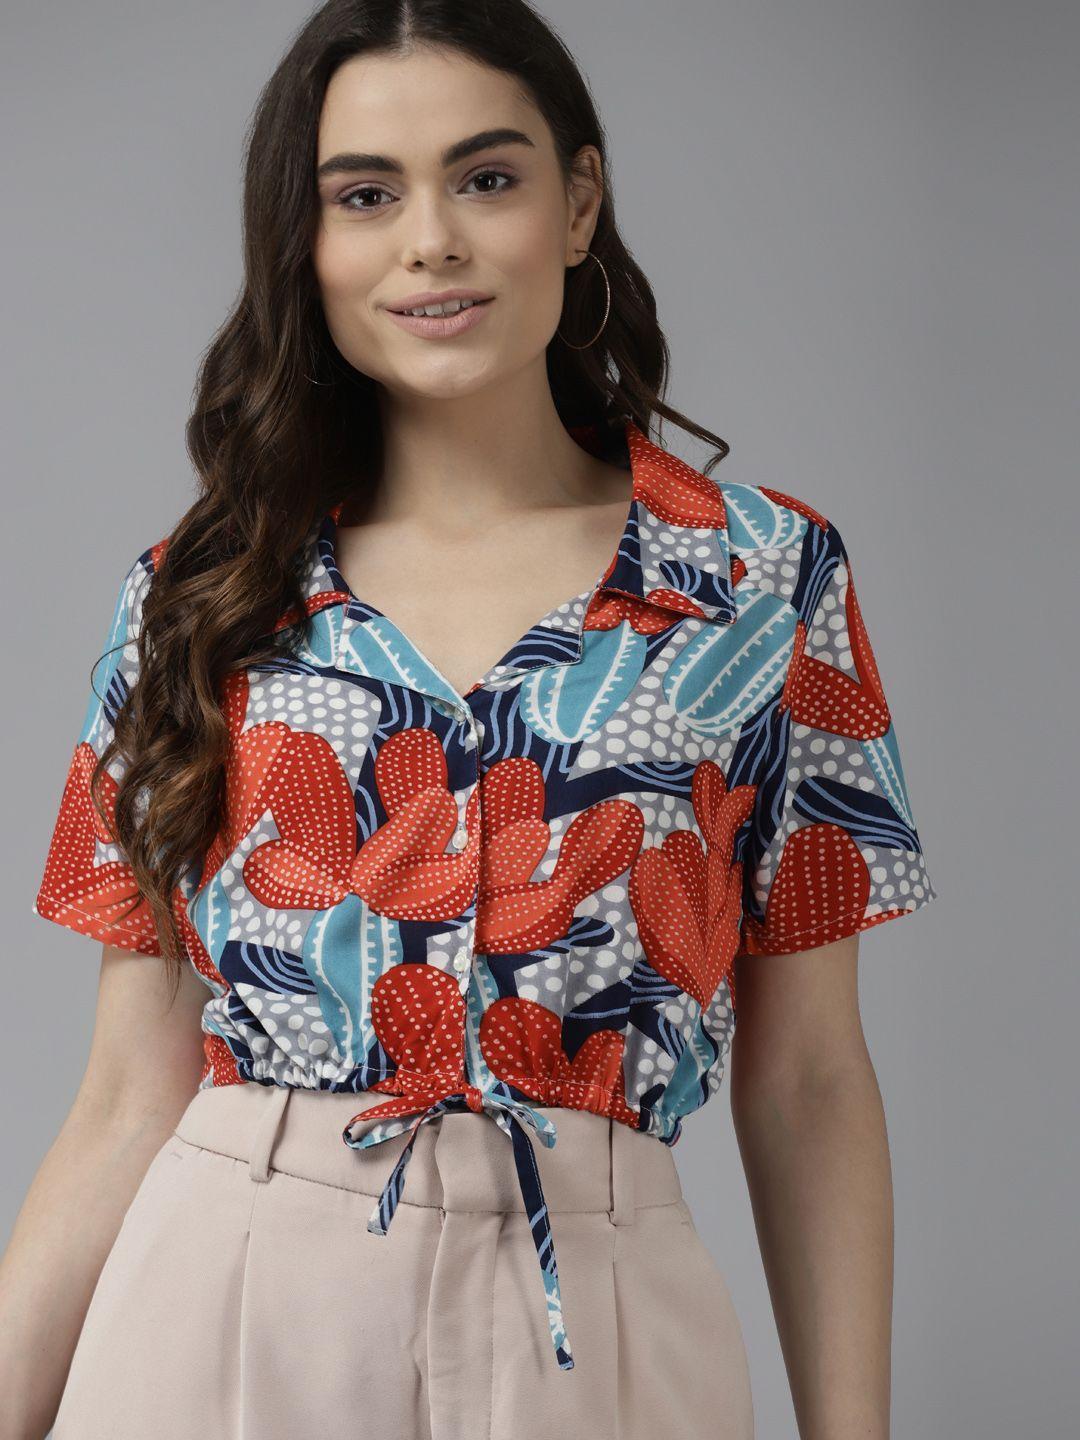 the dry state red & blue cactus printed shirt style top